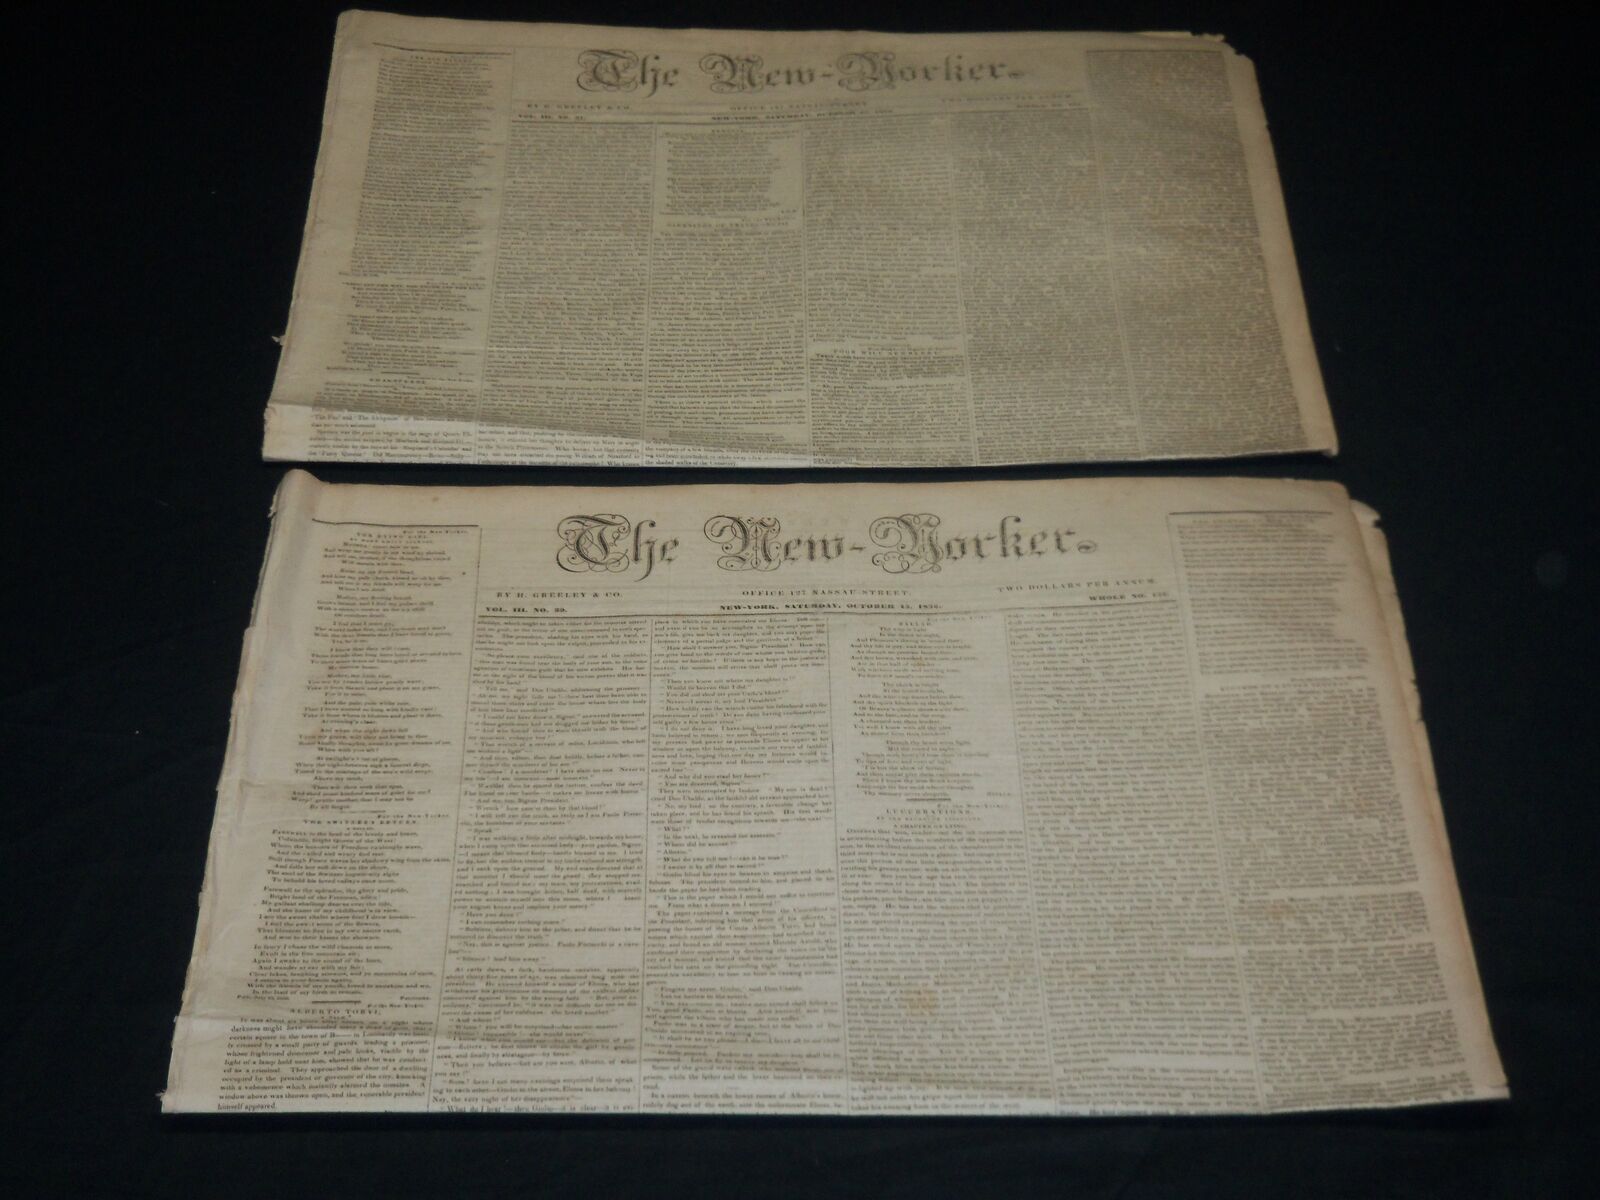 1836 OCTOBER 15 & 22 THE NEW YORKER NEWSPAPER LOT OF 2 ISSUES - NP 4868